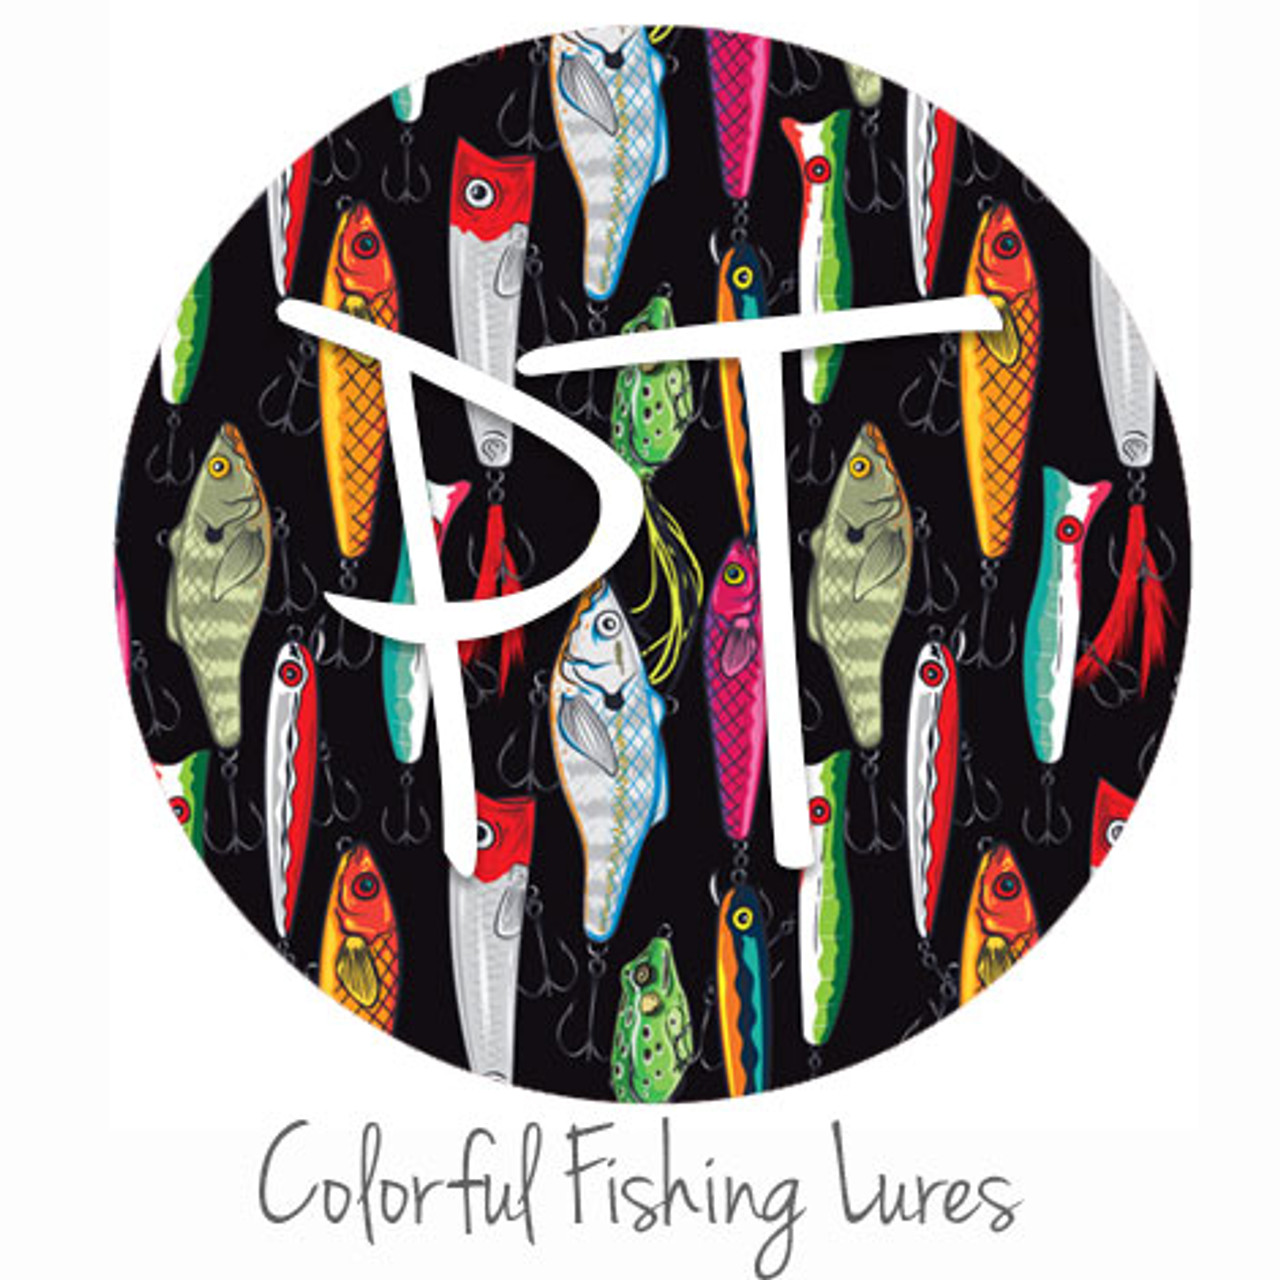 12x12 Permanent Patterned Vinyl - Colorful Fishing Lures